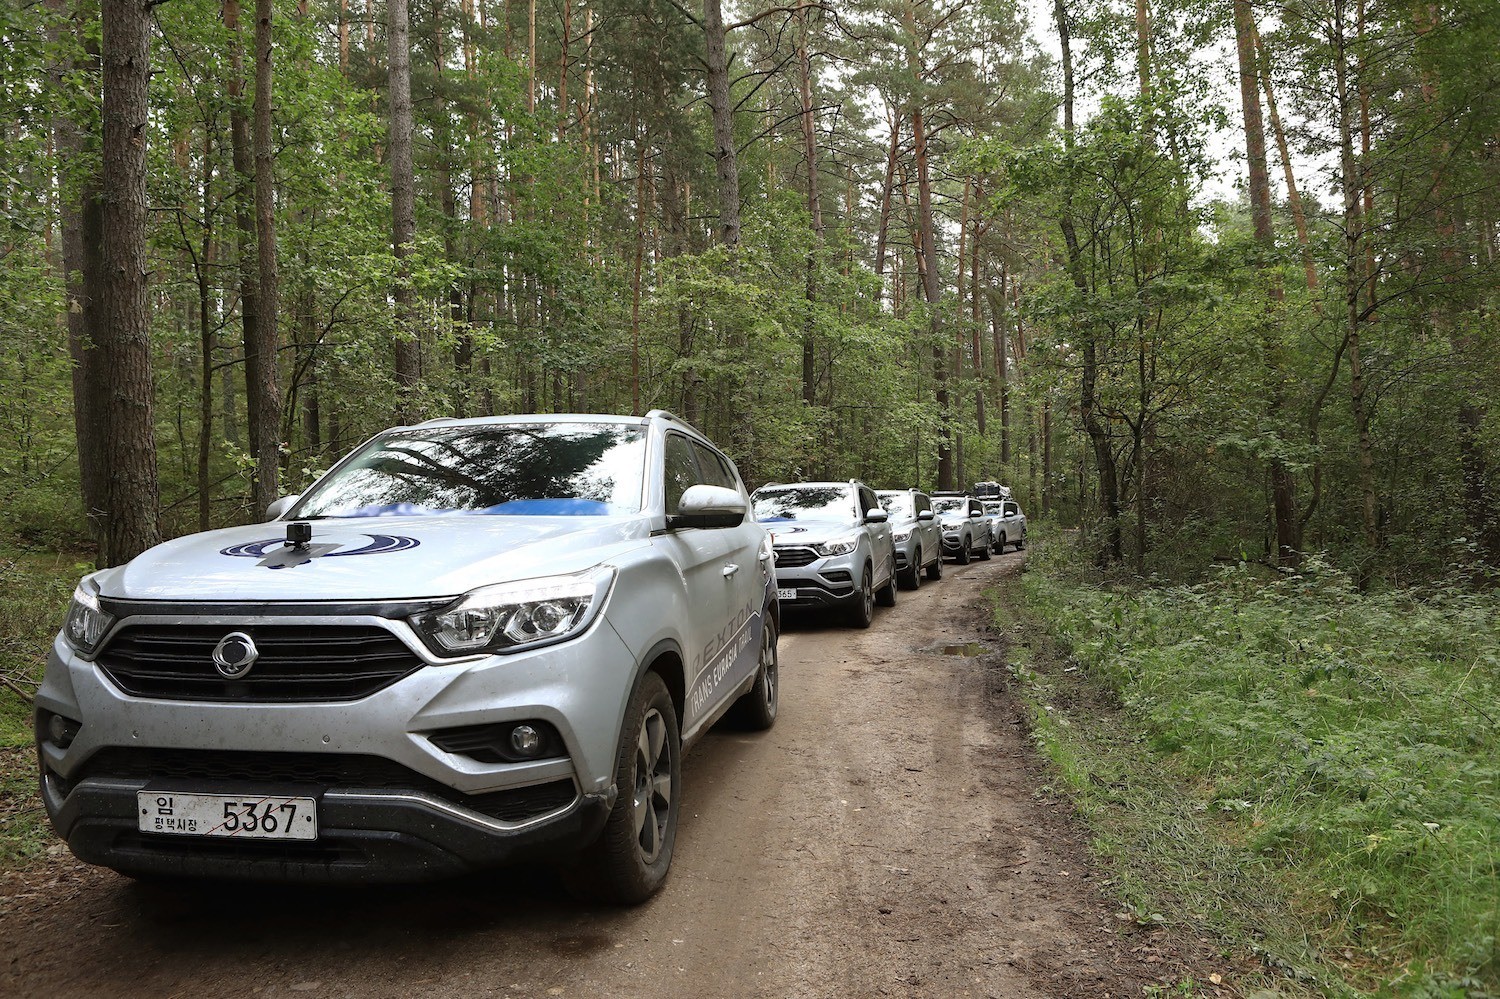 Tom Scanlan reviews the All-New SsangYong Rexton Ultimate 4×4 for Drive 1